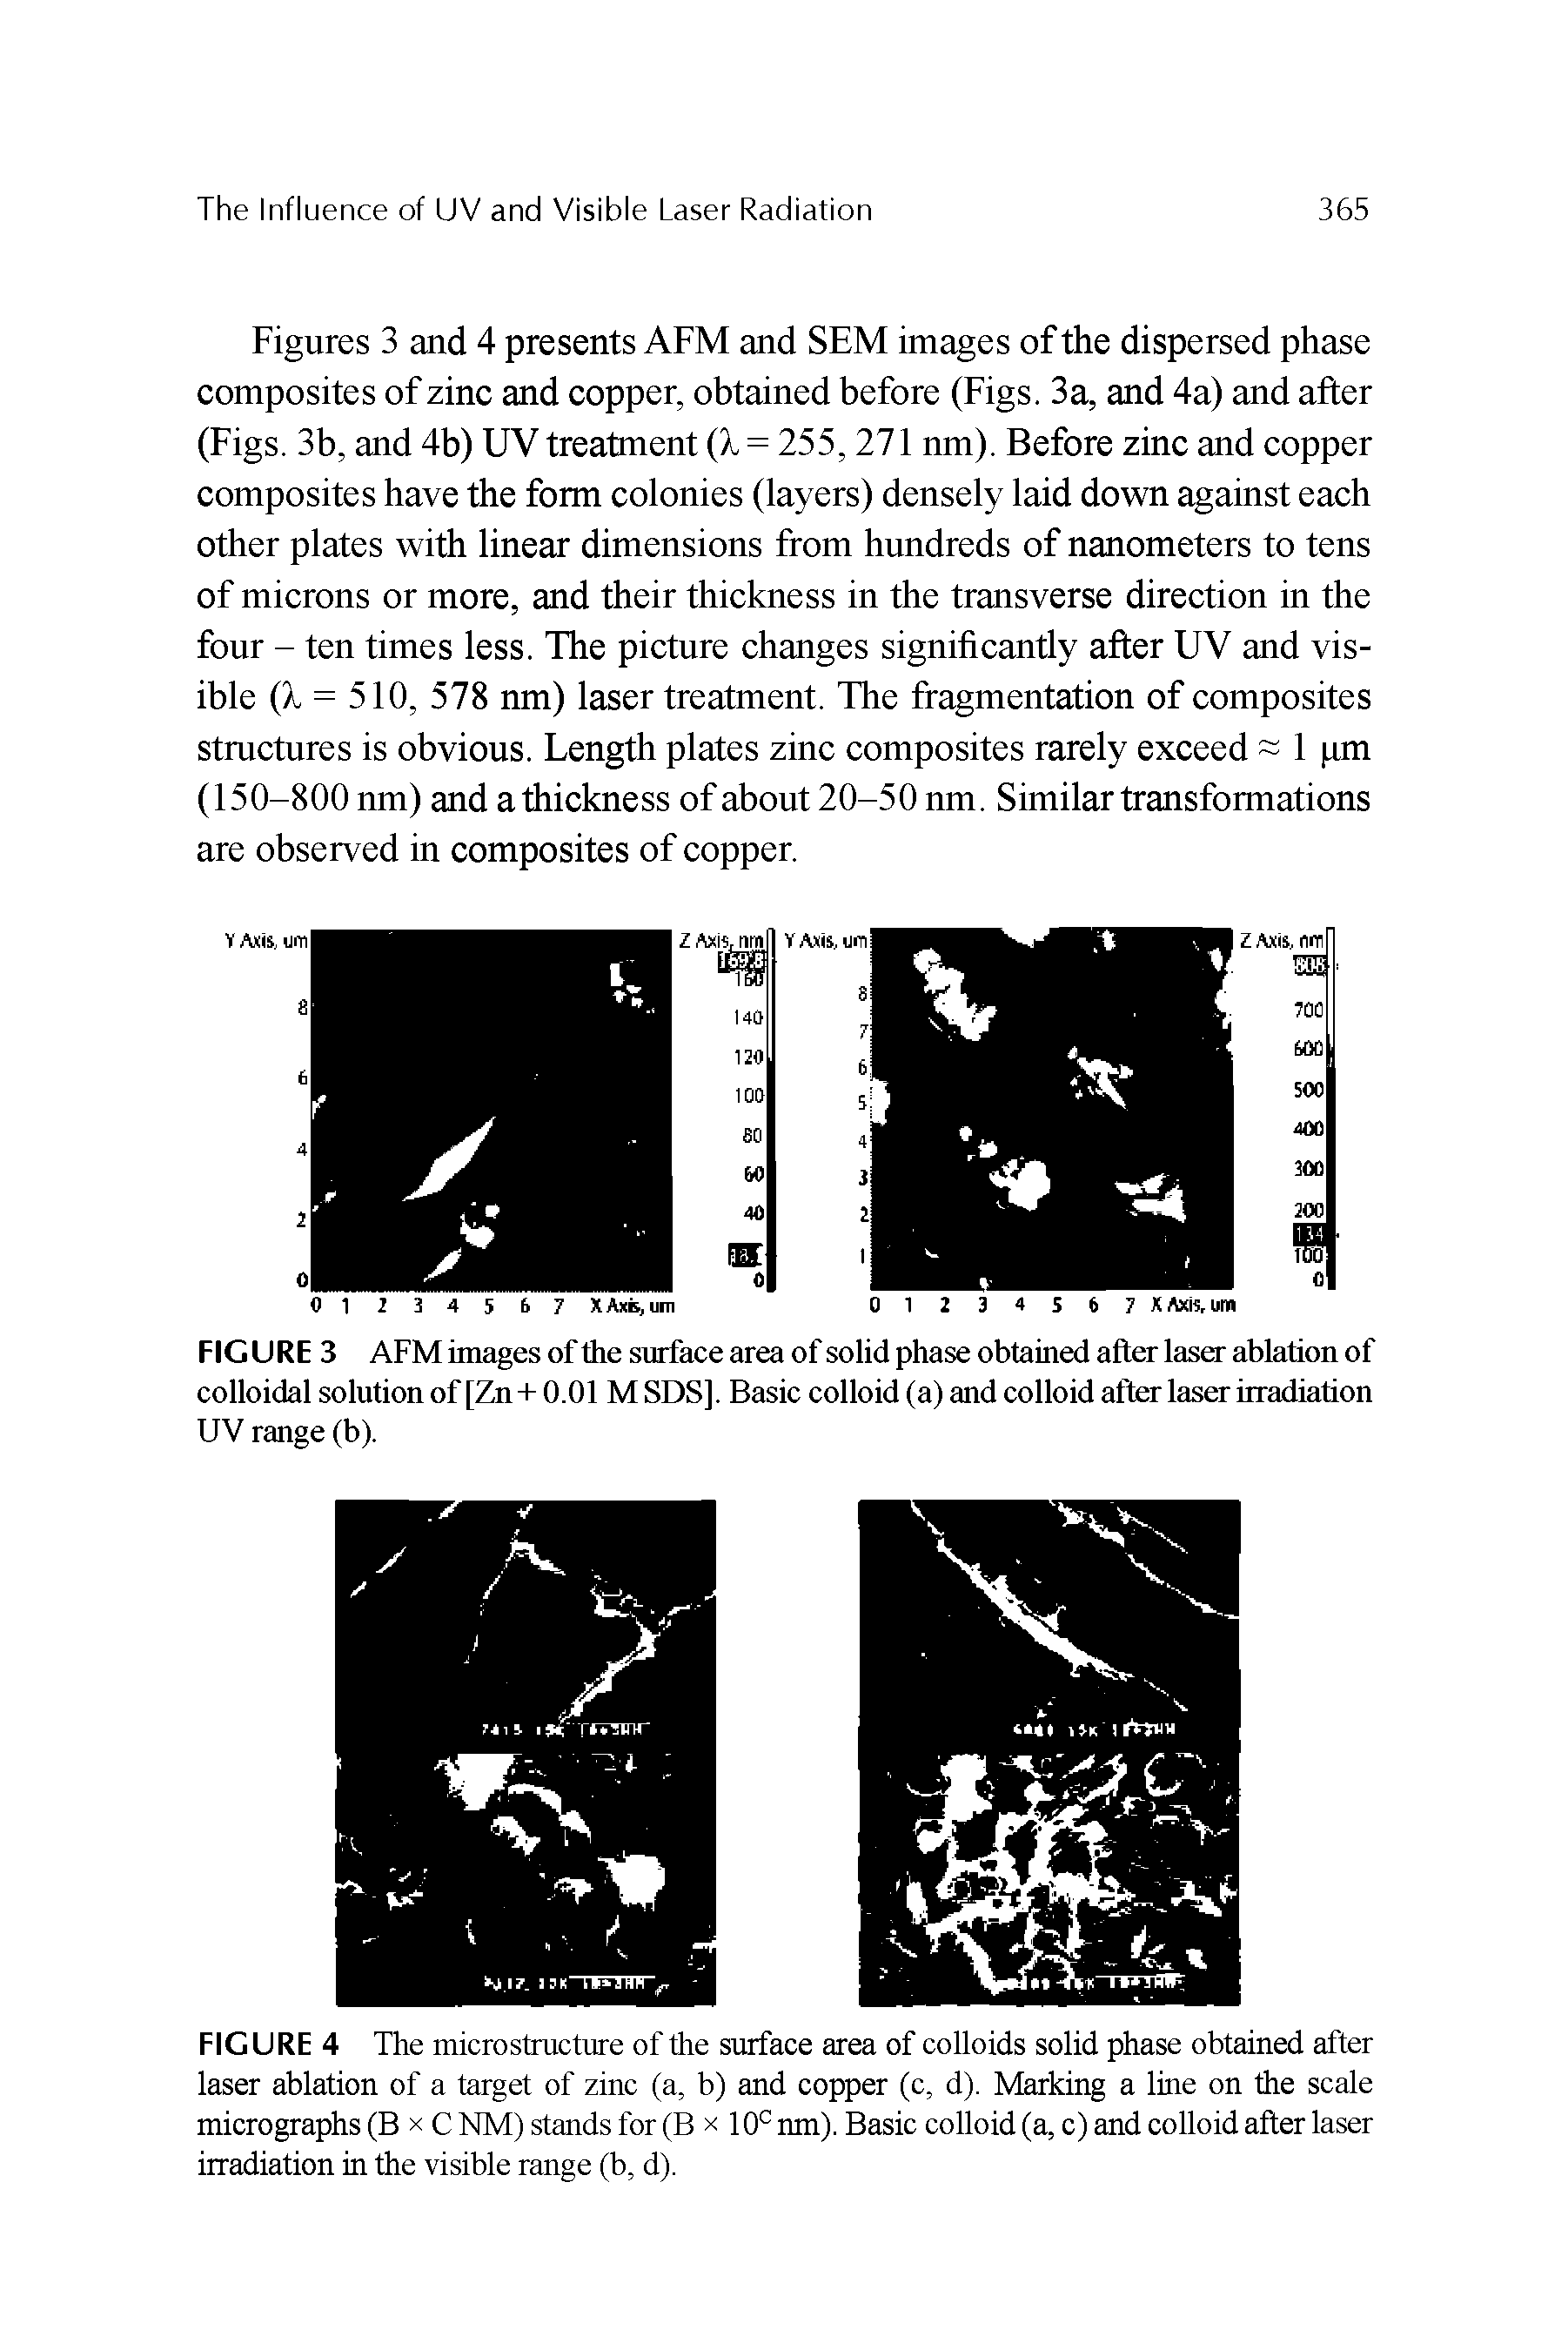 Figures 3 and 4 presents AFM and SEM images of the dispersed phase composites of zinc and copper, obtained before (Figs. 3a, and 4a) and after (Figs. 3b, and 4b) UV treatment ( = 255,271 nm). Before zinc and copper composites have the form colonies (layers) densely laid down against each other plates with linear dimensions from hundreds of nanometers to tens of microns or more, and their thickness in the transverse direction in the four - ten times less. The picture changes significantly after UV and visible ( = 510, 578 nm) laser treatment. The fragmentation of composites stmctures is obvious. Length plates zinc composites rarely exceed 1 pm (150-800 nm) and athickness of about 20-50 nm. Similar transformations are observed in composites of copper.